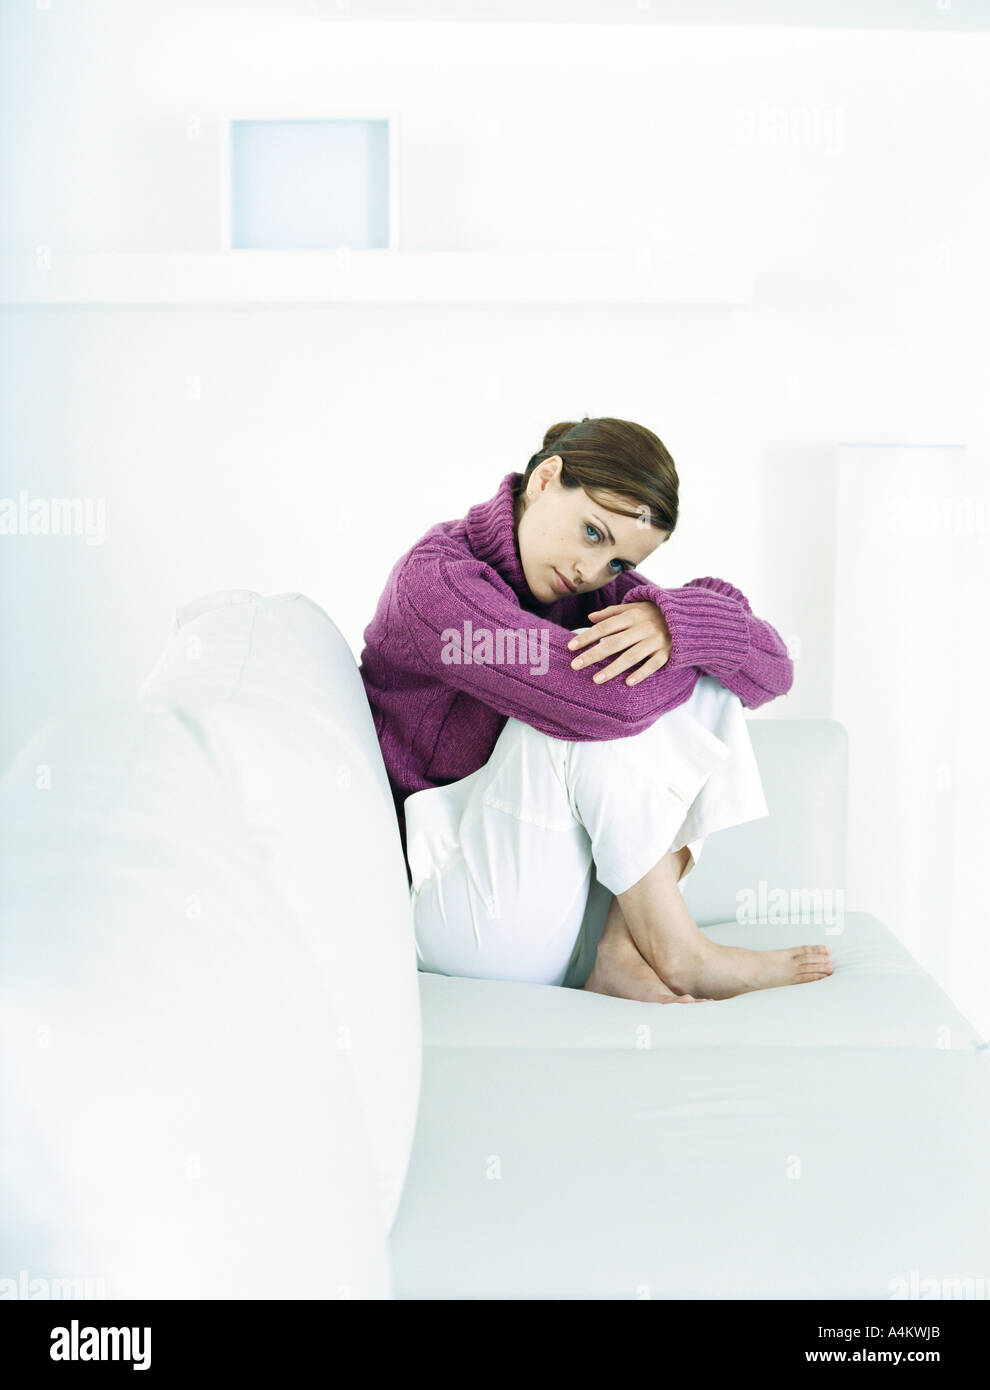 Young woman sitting barefoot on sofa with knees up and head bent forward Stock Photo